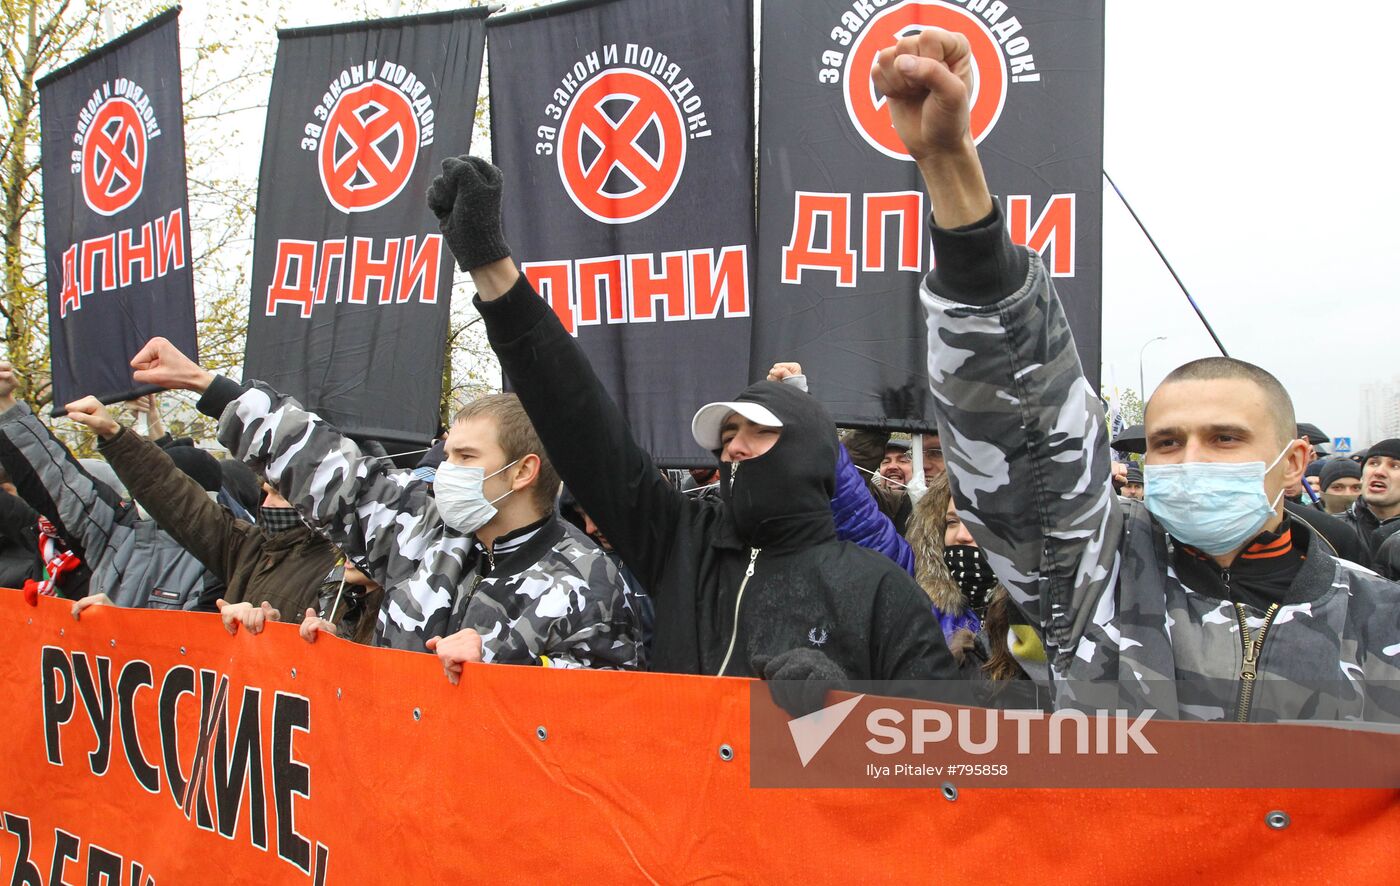 Russian ultra-nationalists march